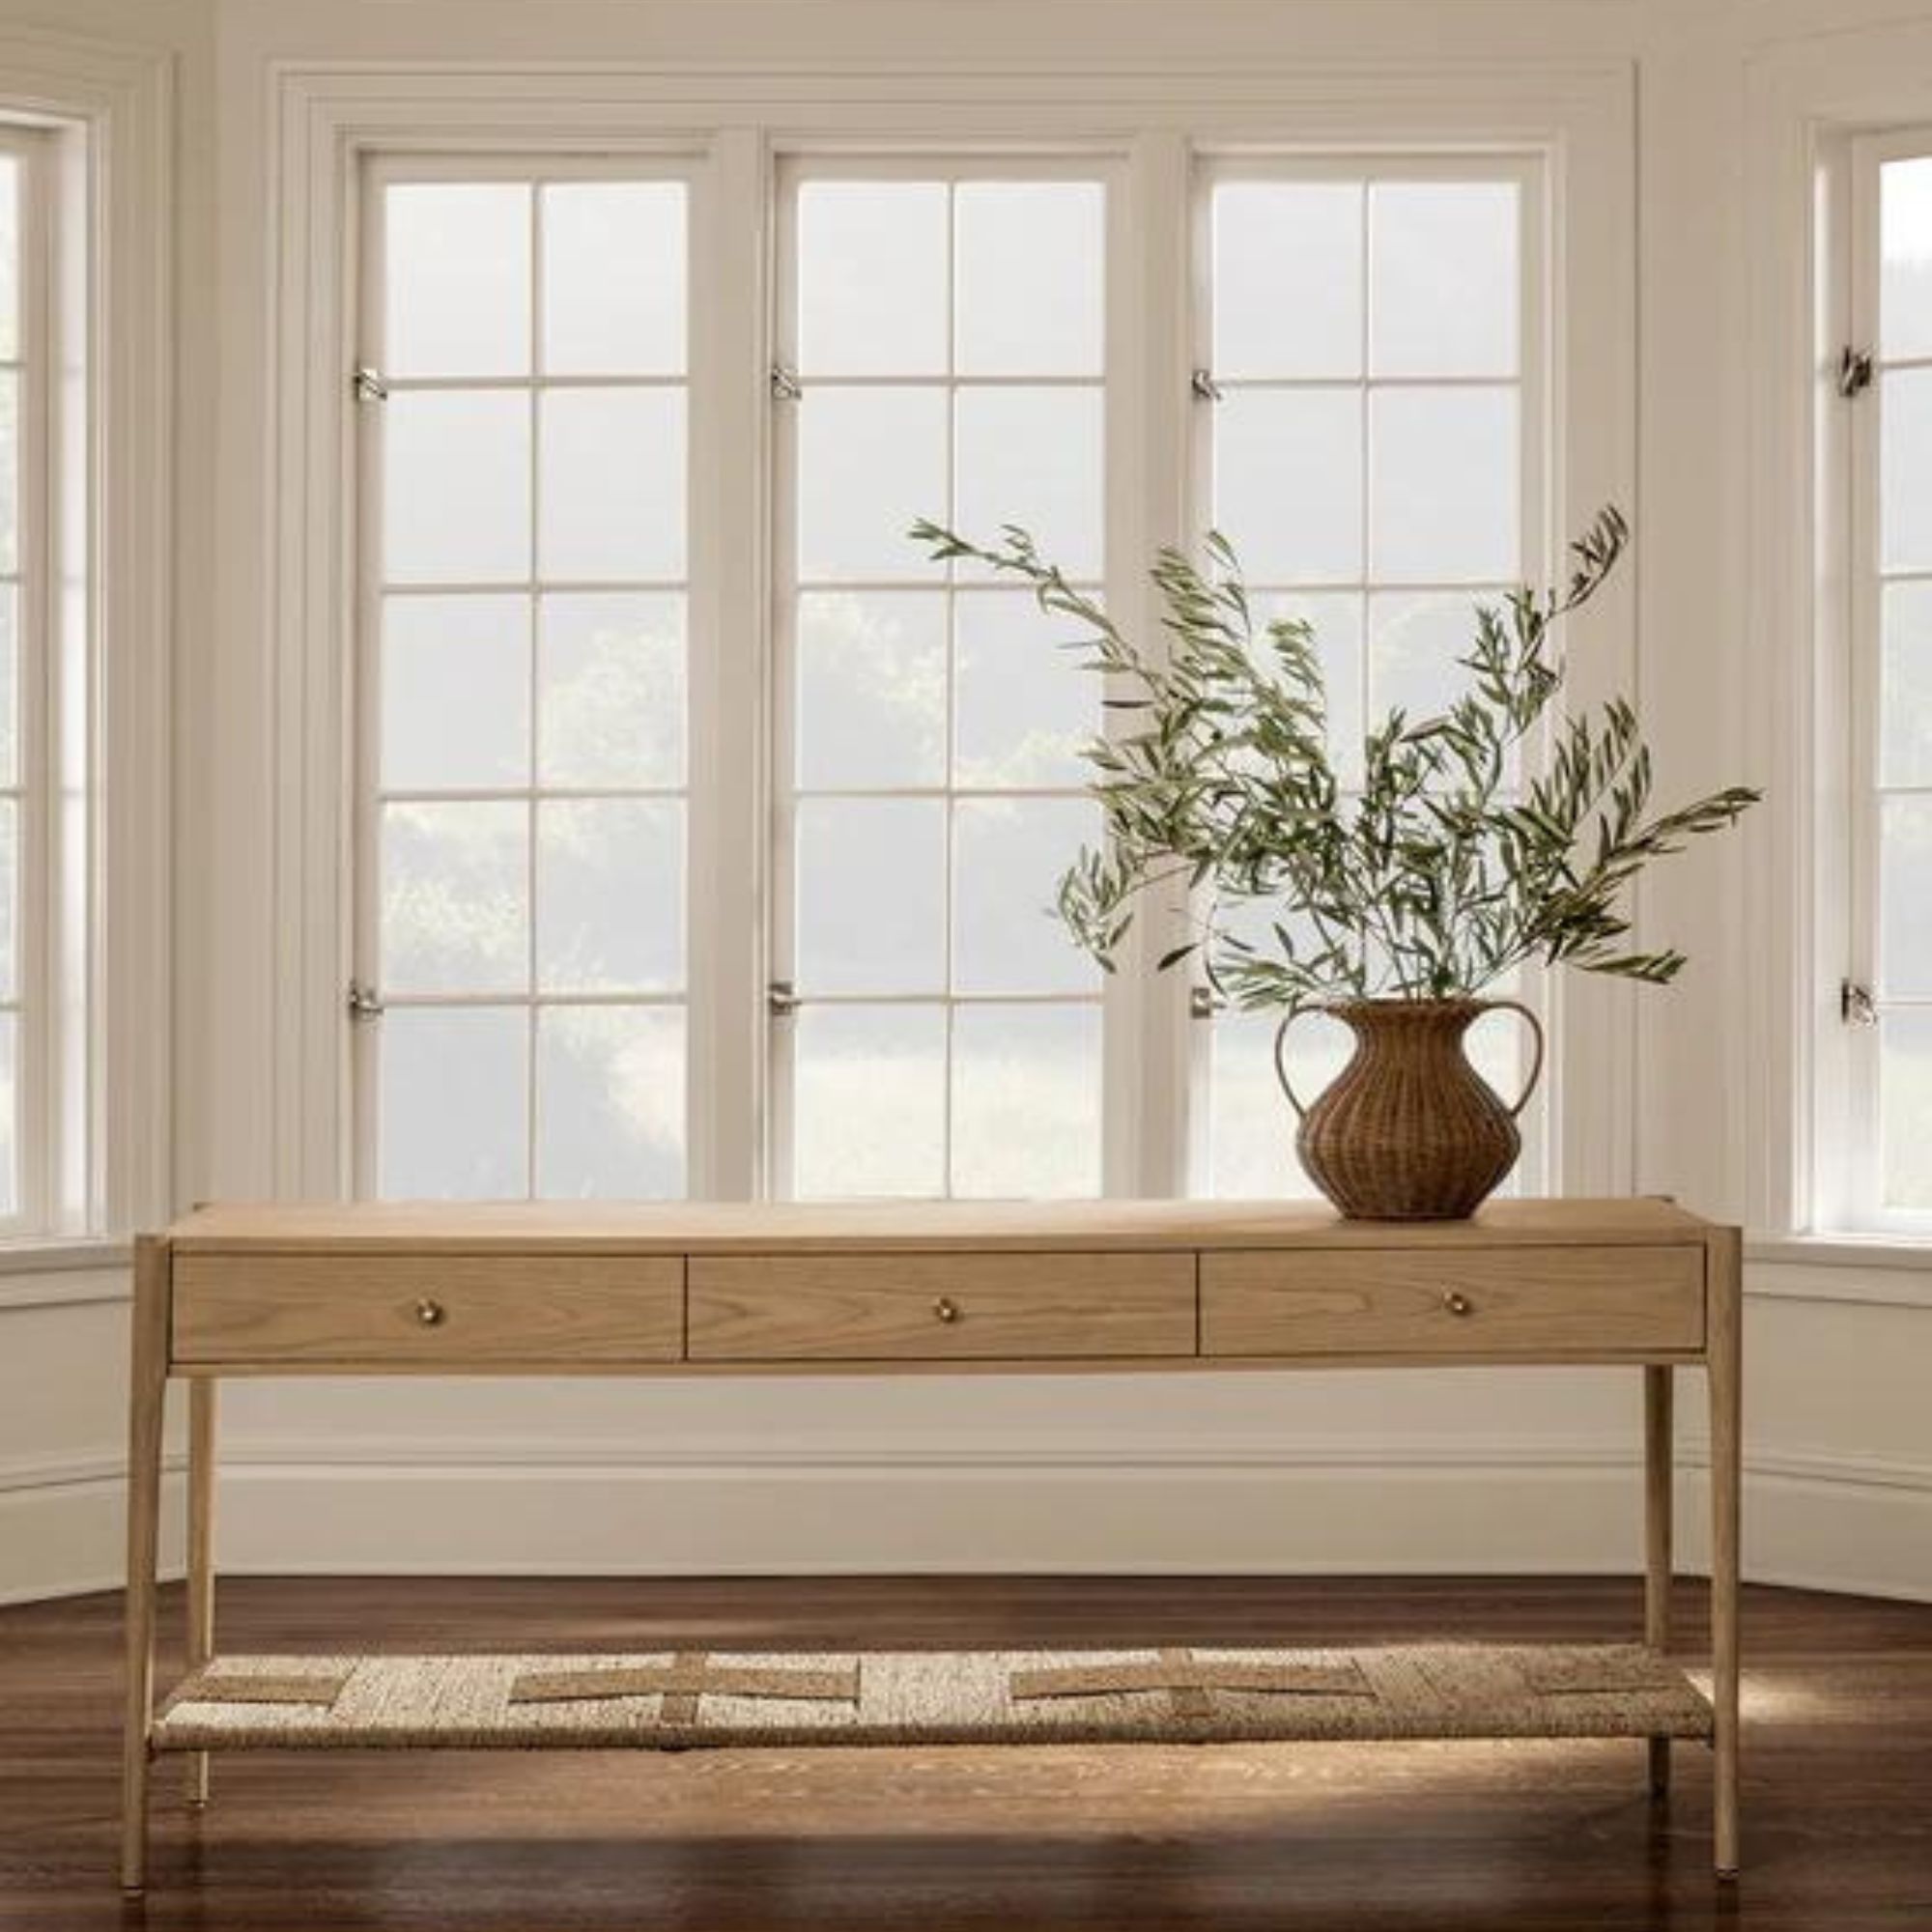 A light wooden console table in front of a large picture window